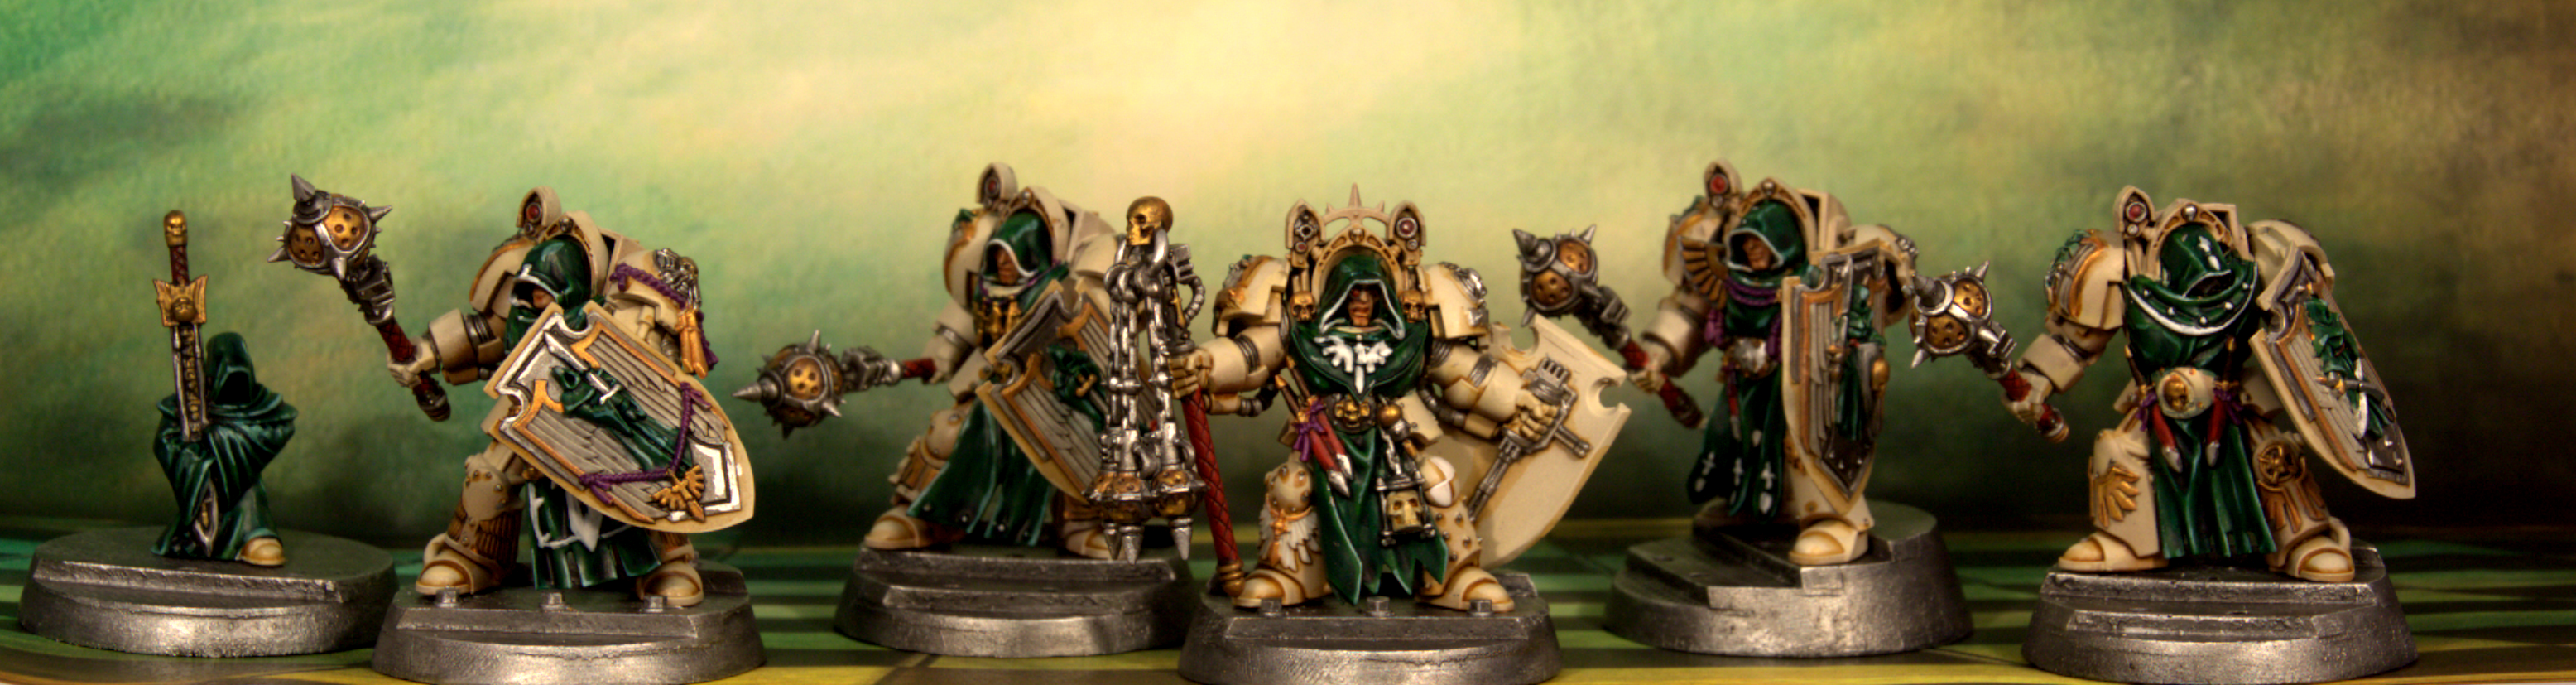 Deathwing, Knights, Deathwing Knights